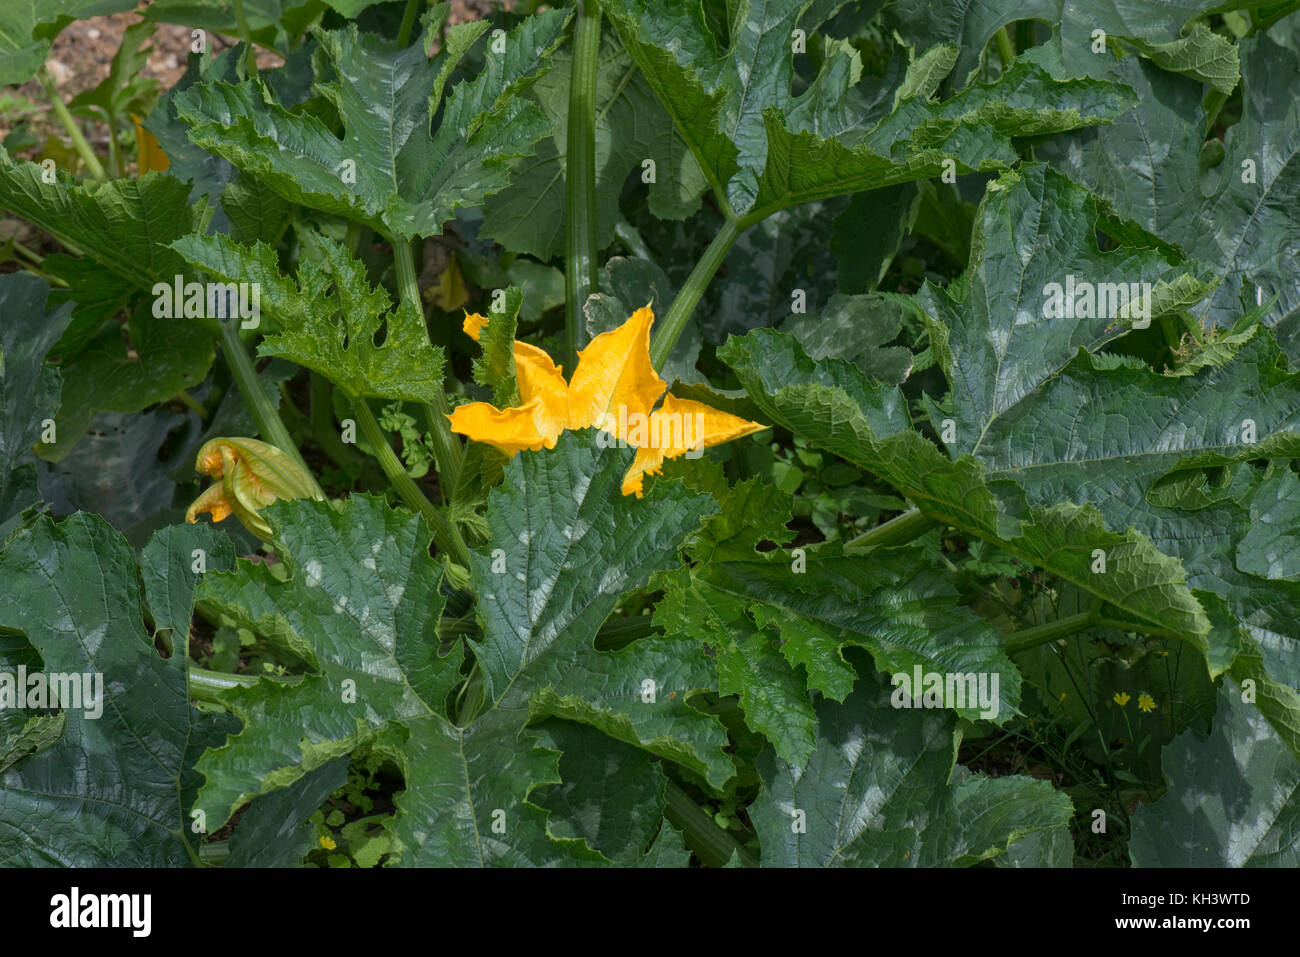 Yellow male and female flowers on a zucchini or courgette plant with young fruit developing under bold cucurbit type dark green leaves Stock Photo